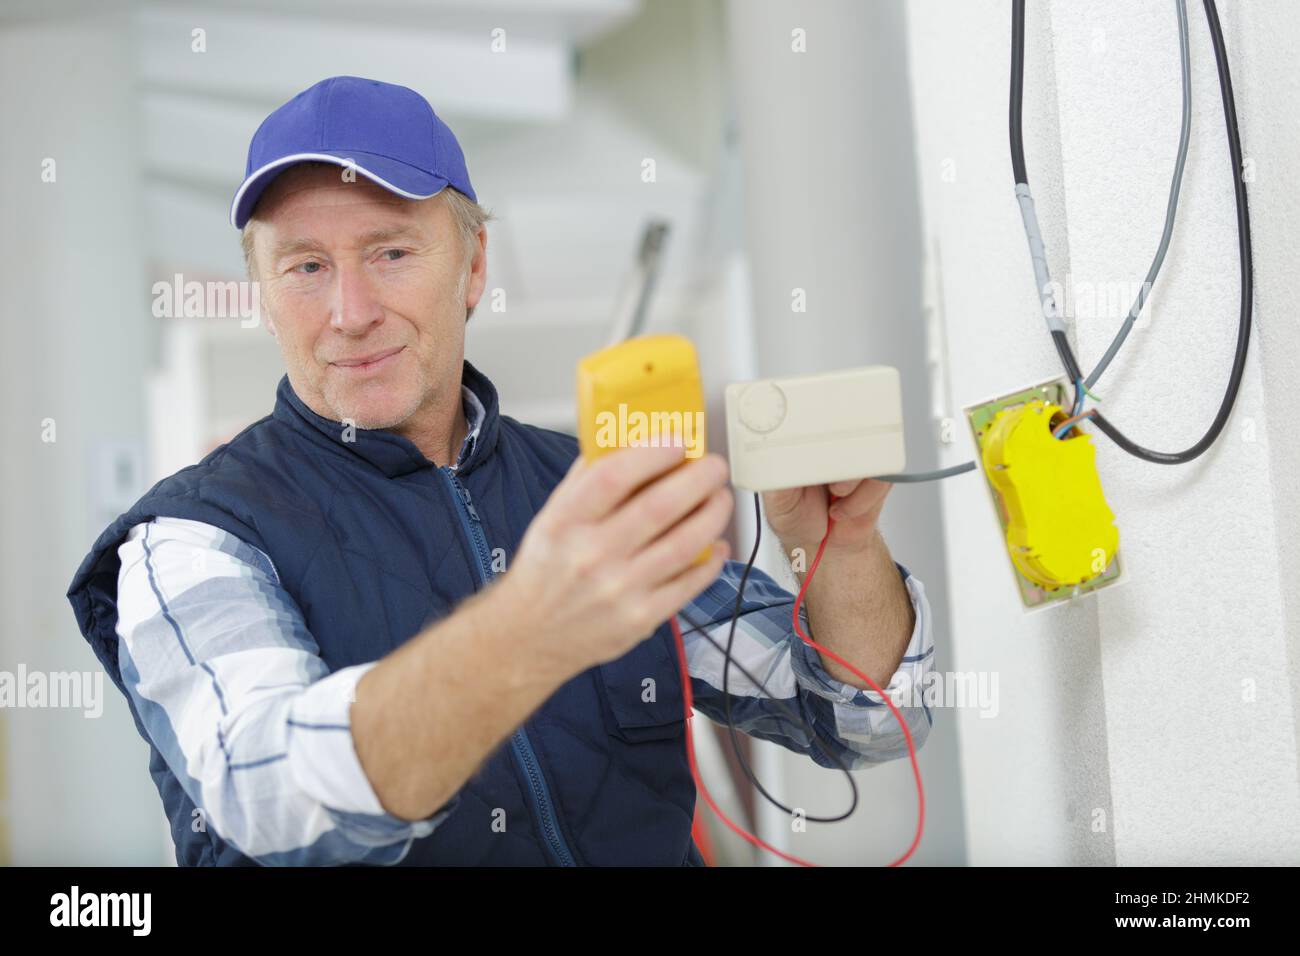 experienced electrician doing electrical work with high precision and neatness Stock Photo